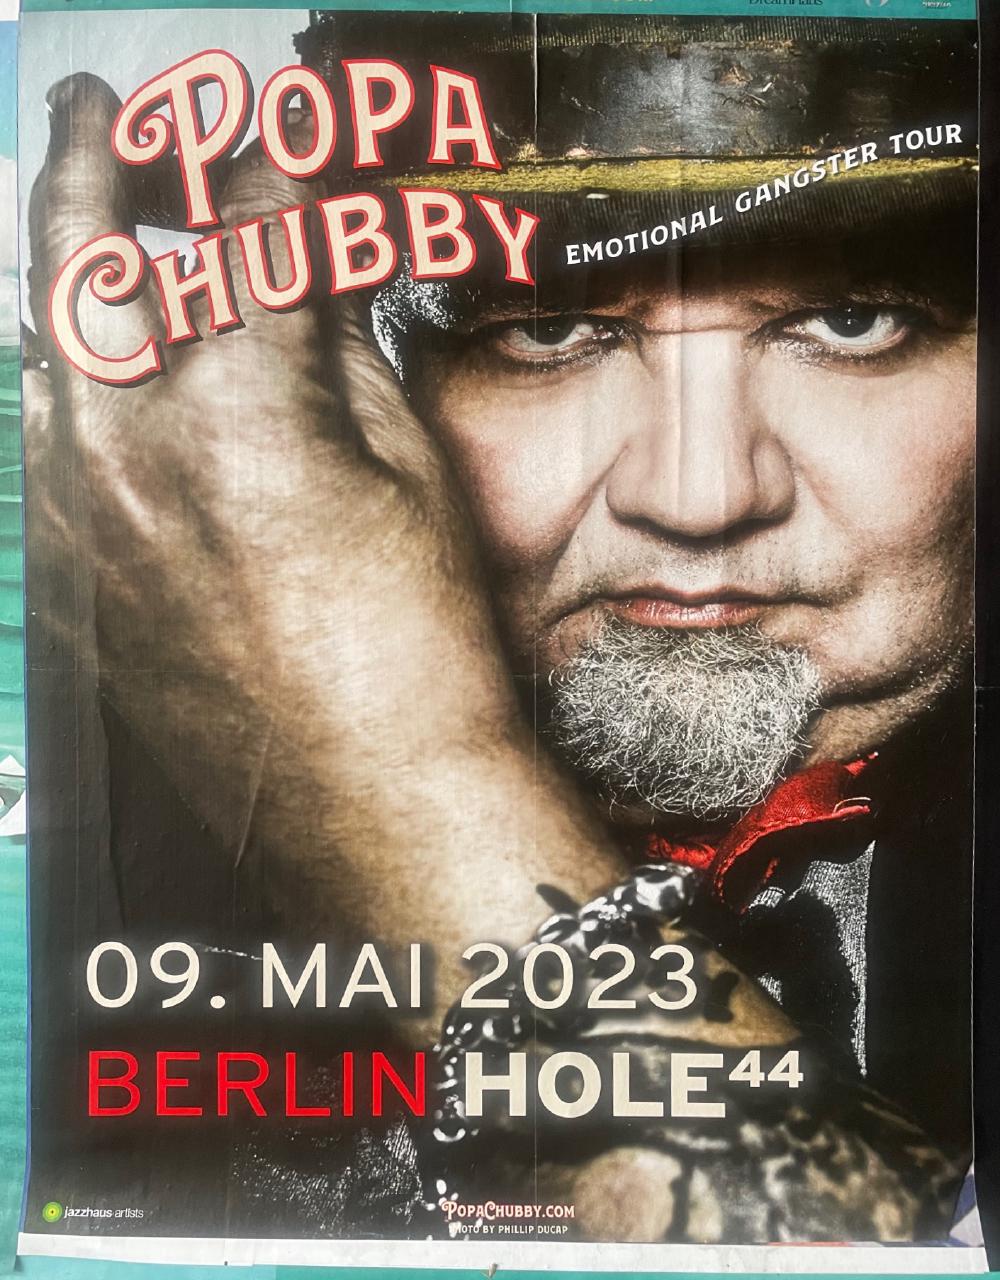 A poster for Papa Chubby at Berlin Hole